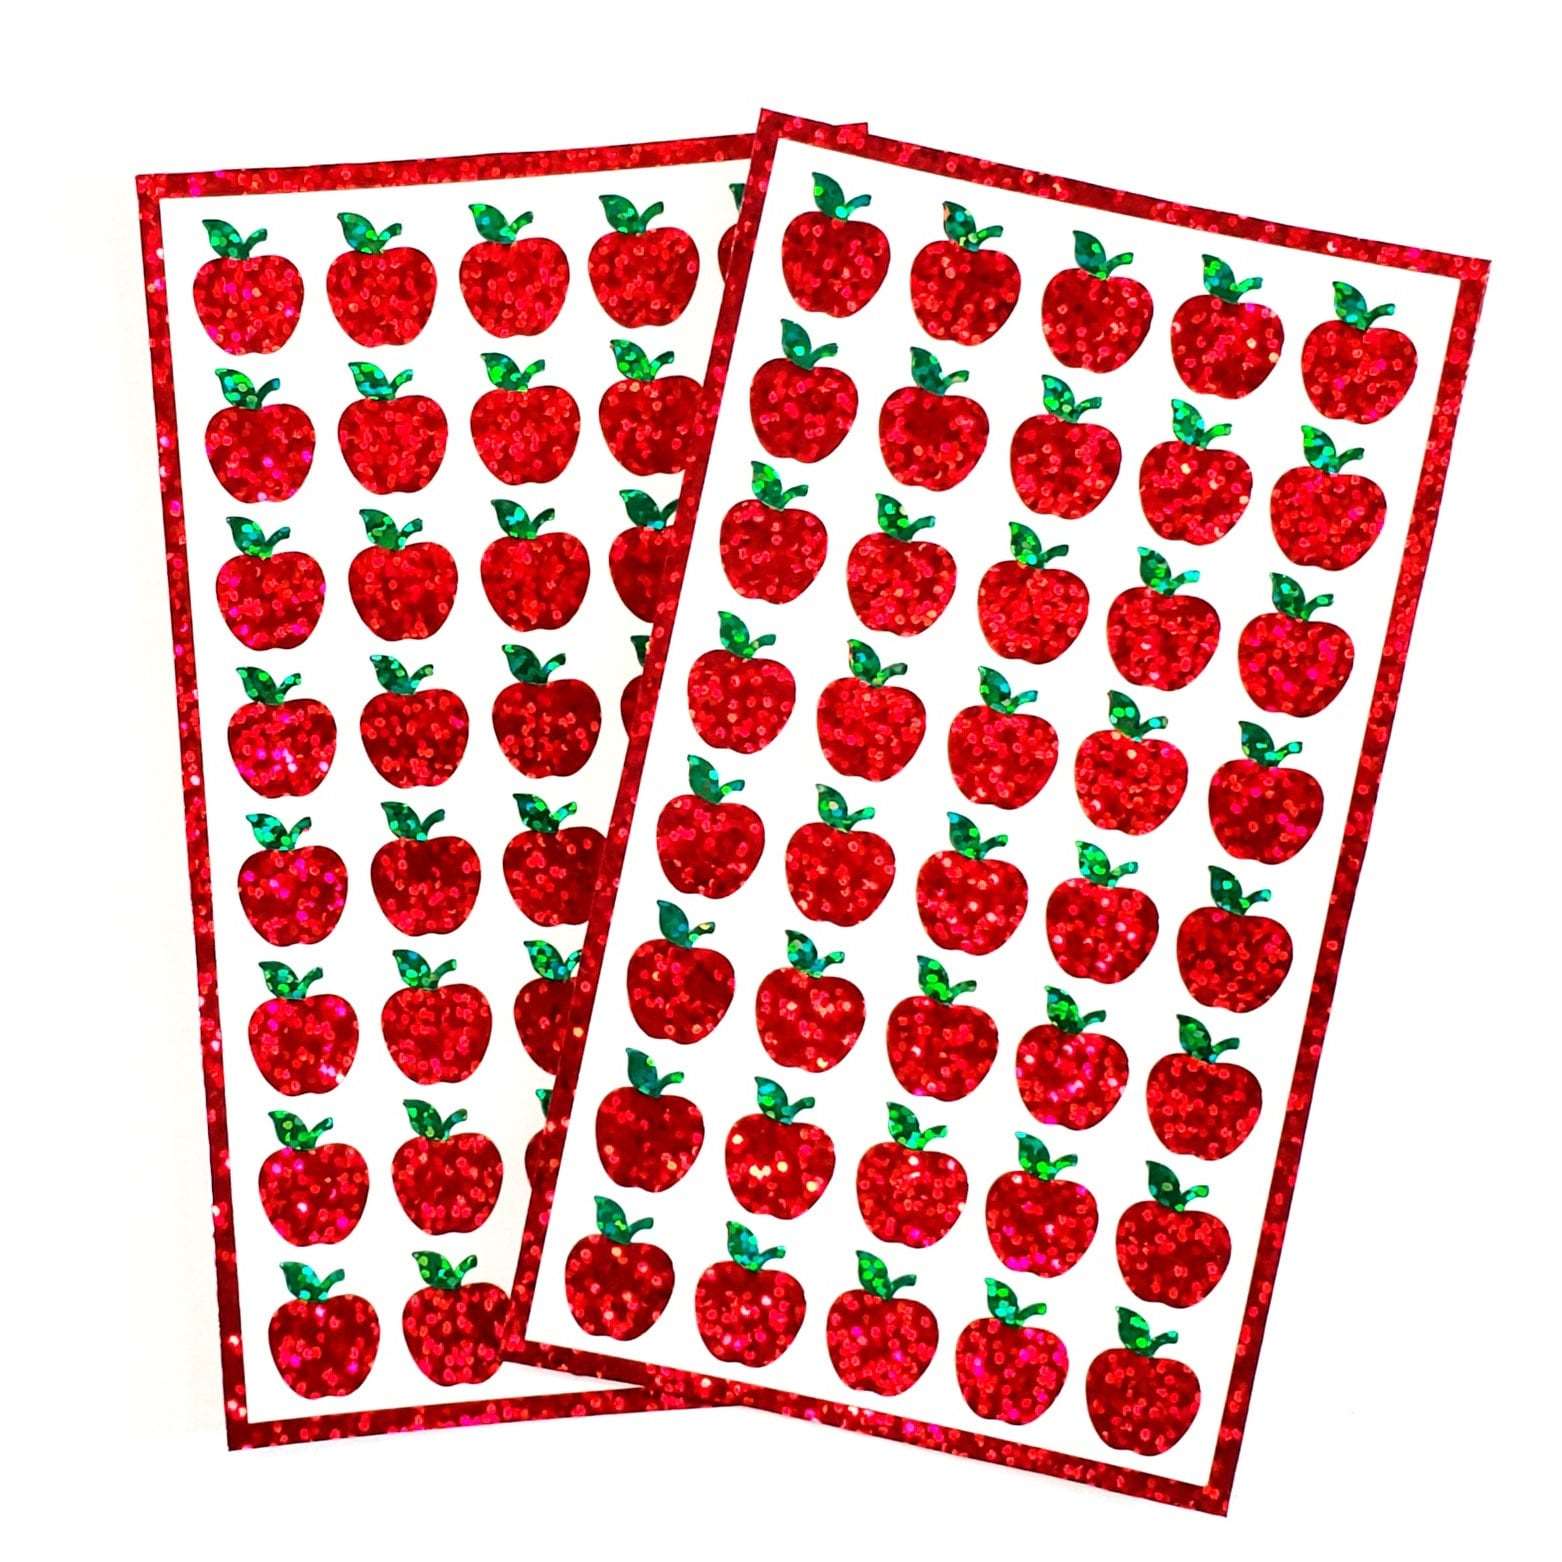 Small Apples Sticker Sheet, set of 40 sparkly red apple vinyl decals, back to school decorations, teacher stickers, recipe card labels.